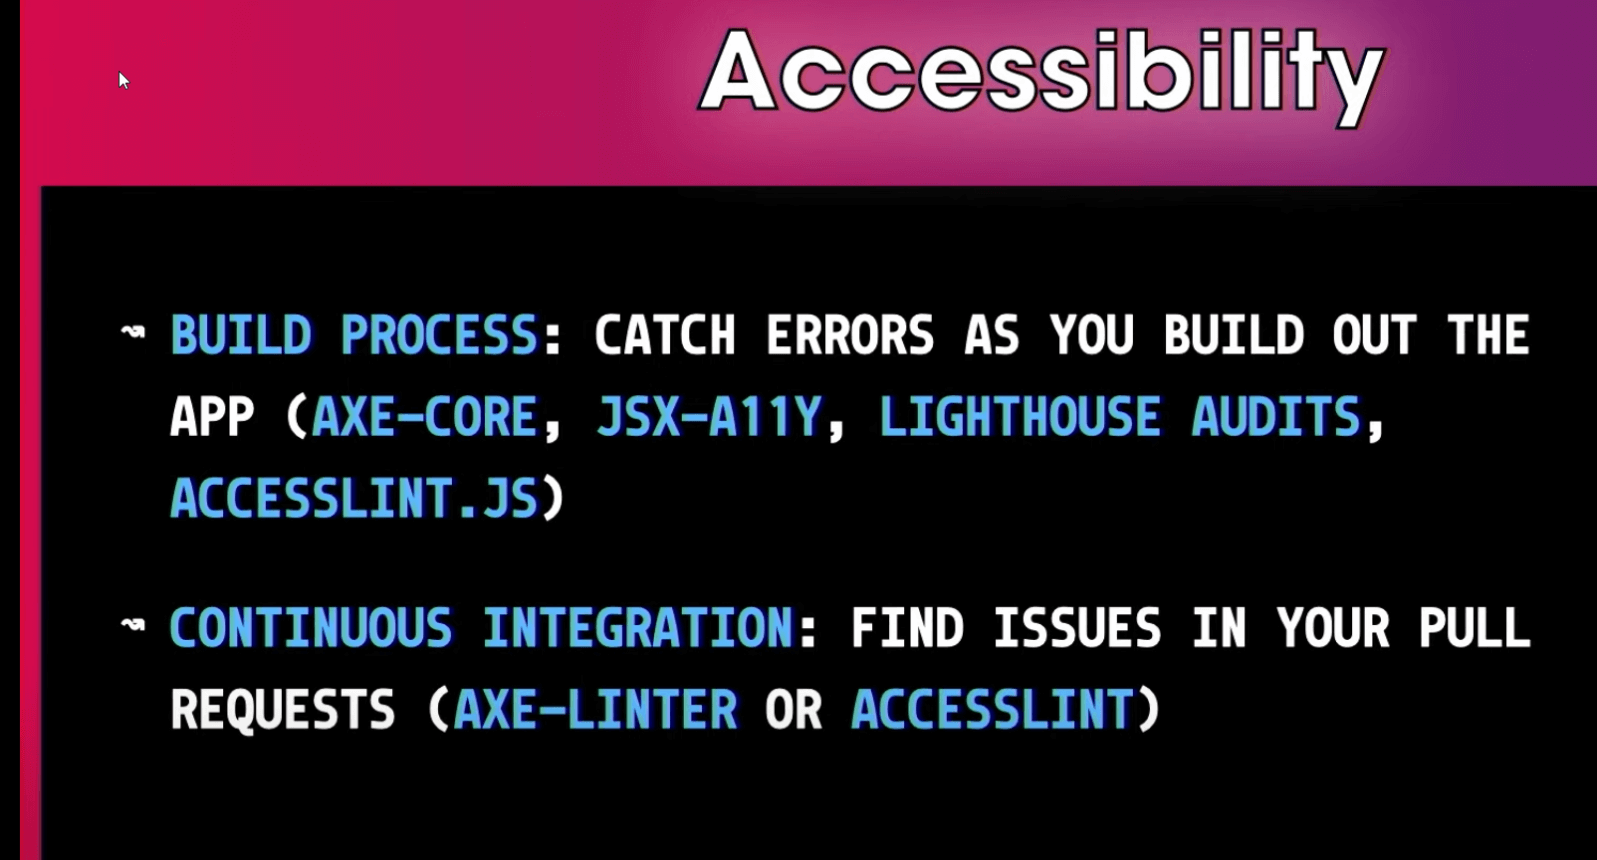 Screen slide showing accessibility tips - BUILD PROCESS: catch errors as you build out the app (axe-core, jsx-a11y, lighthouse audits, accesslint.js). Continuous Integration: find issues in your pull requests (axe-linter or accesslint)